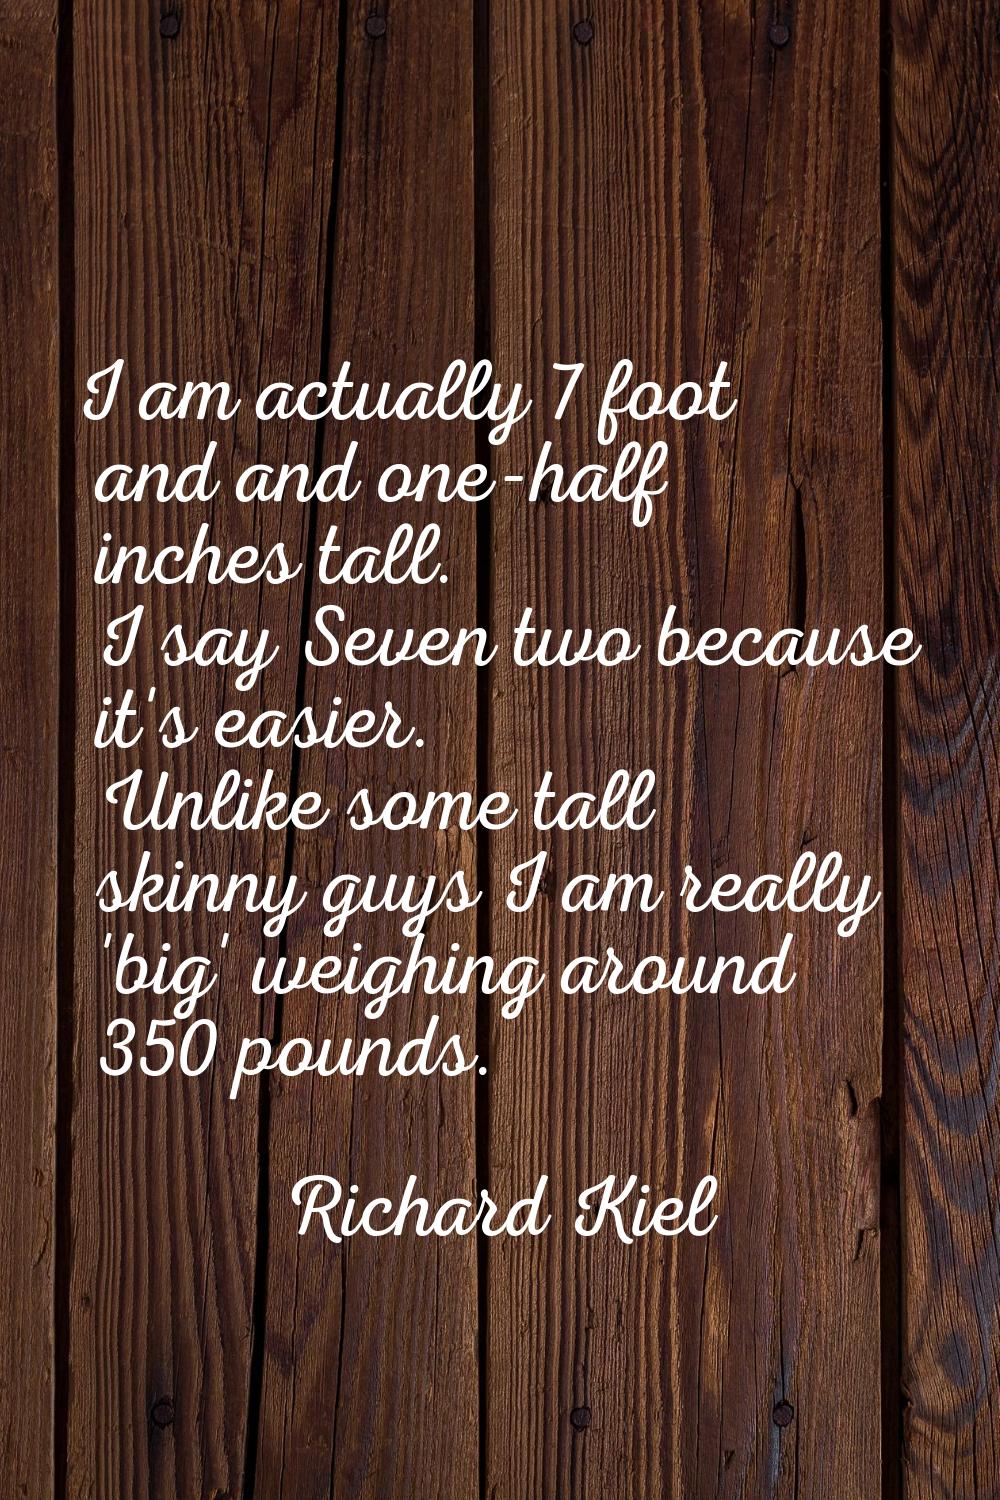 I am actually 7 foot and and one-half inches tall. I say Seven two because it's easier. Unlike some